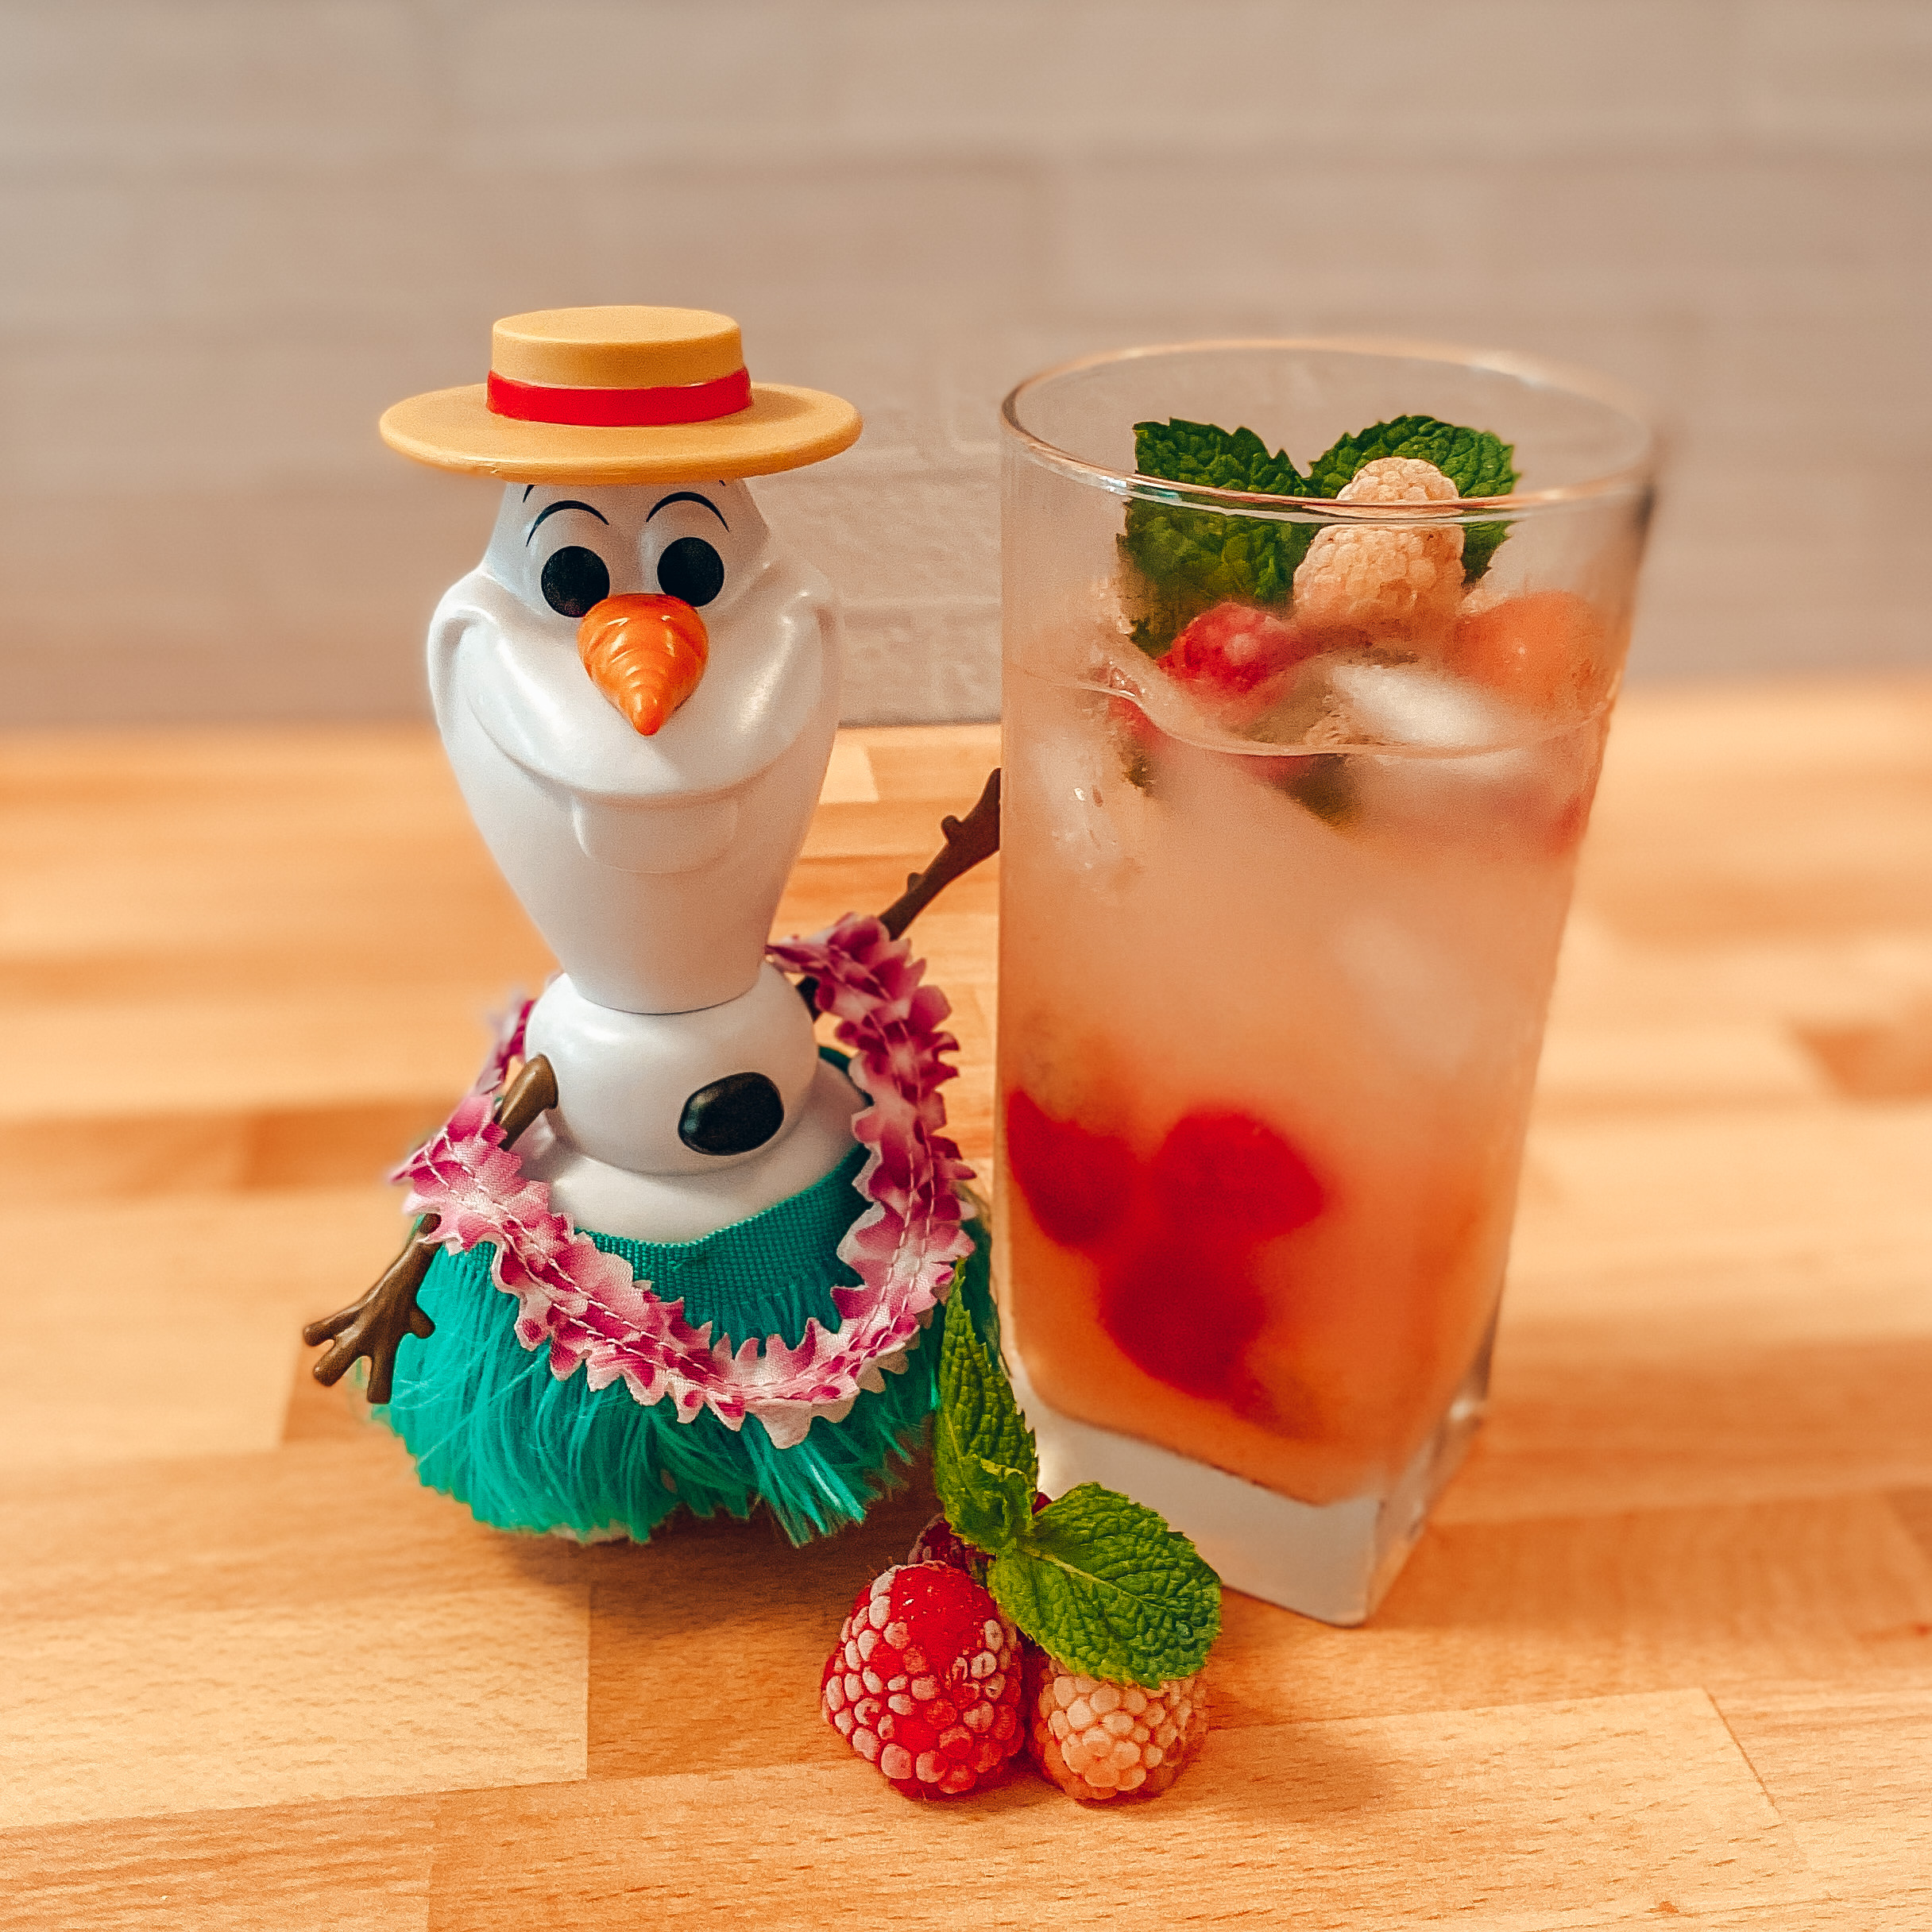 Olaf's Summertime Sip (tall glass of lemonade with frozen raspberries and a spring of fresh mint) with a plastic toy Olaf